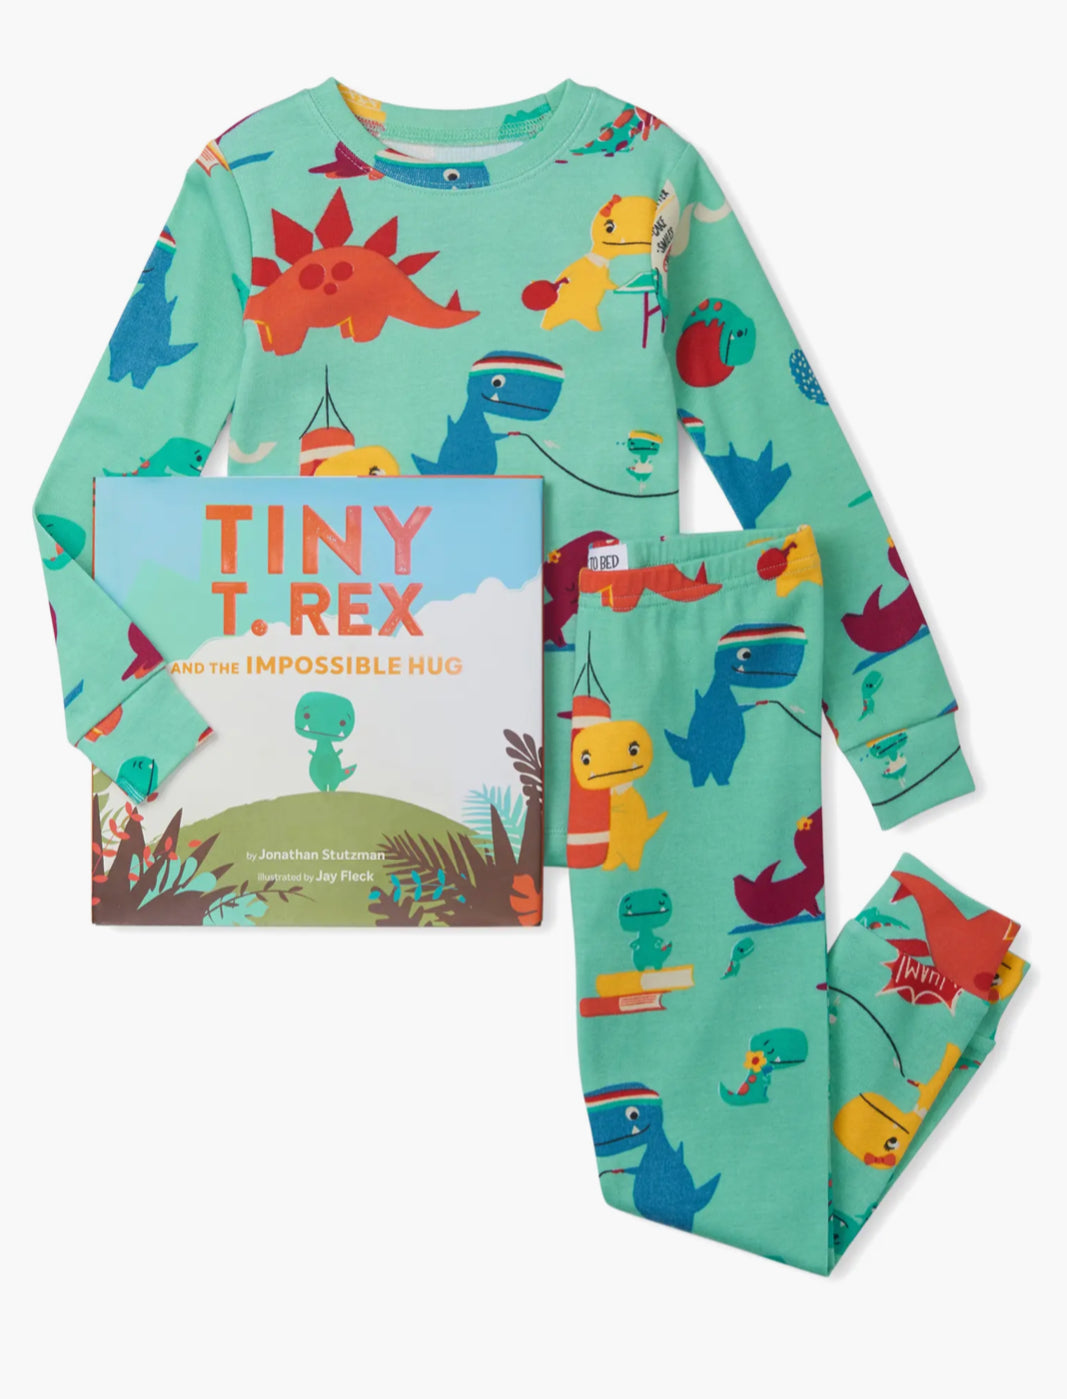 Books to Bed Tiny T-Rex